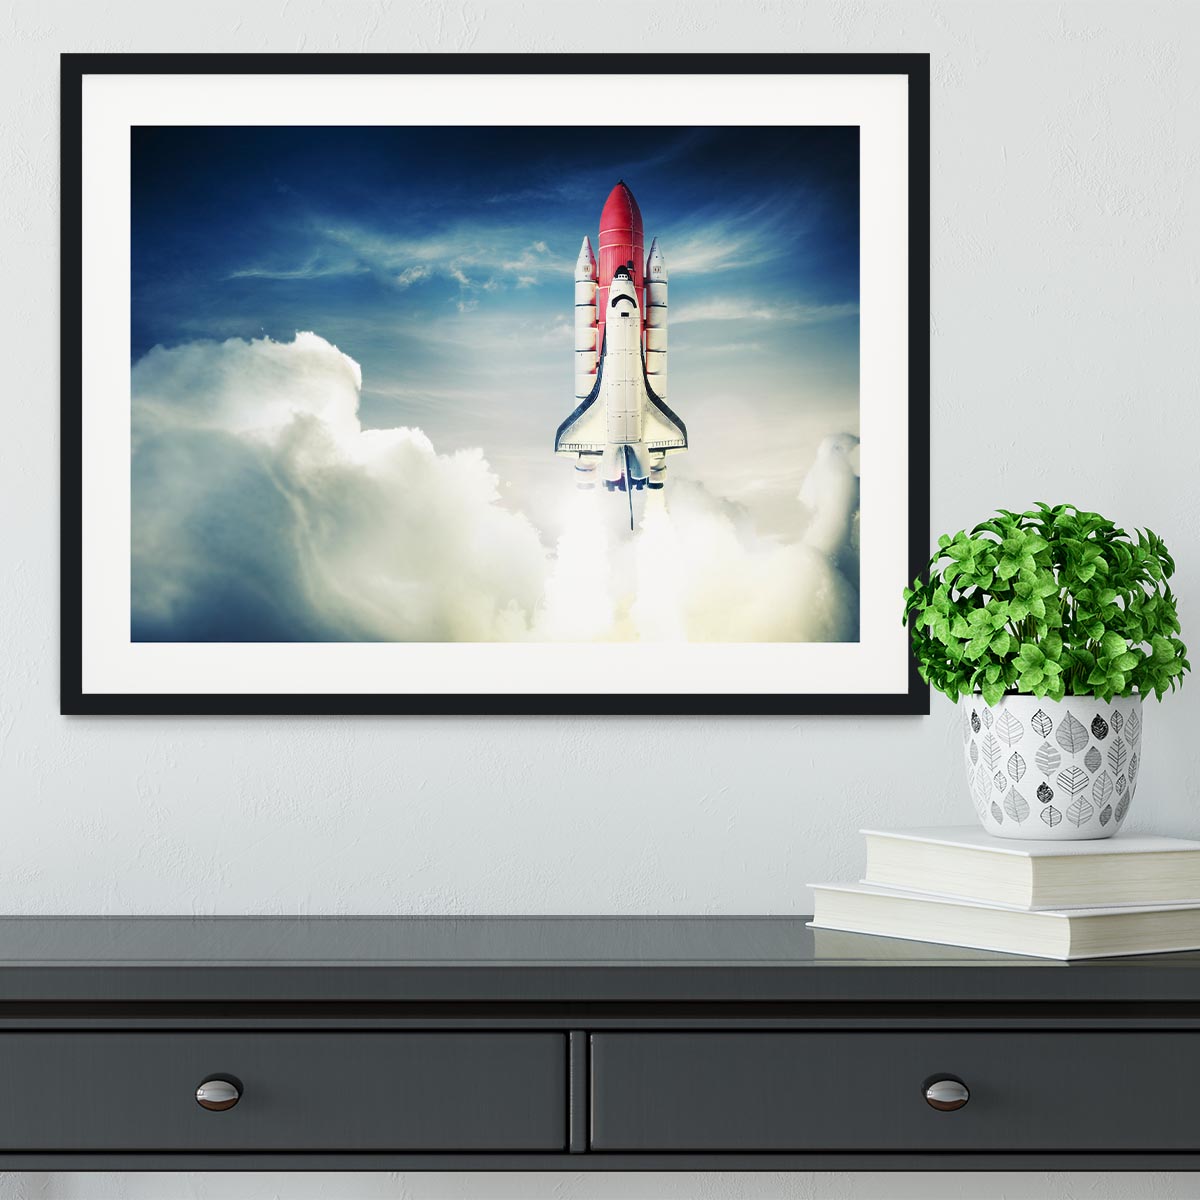 Space shuttle taking off on a mission Framed Print - Canvas Art Rocks - 1